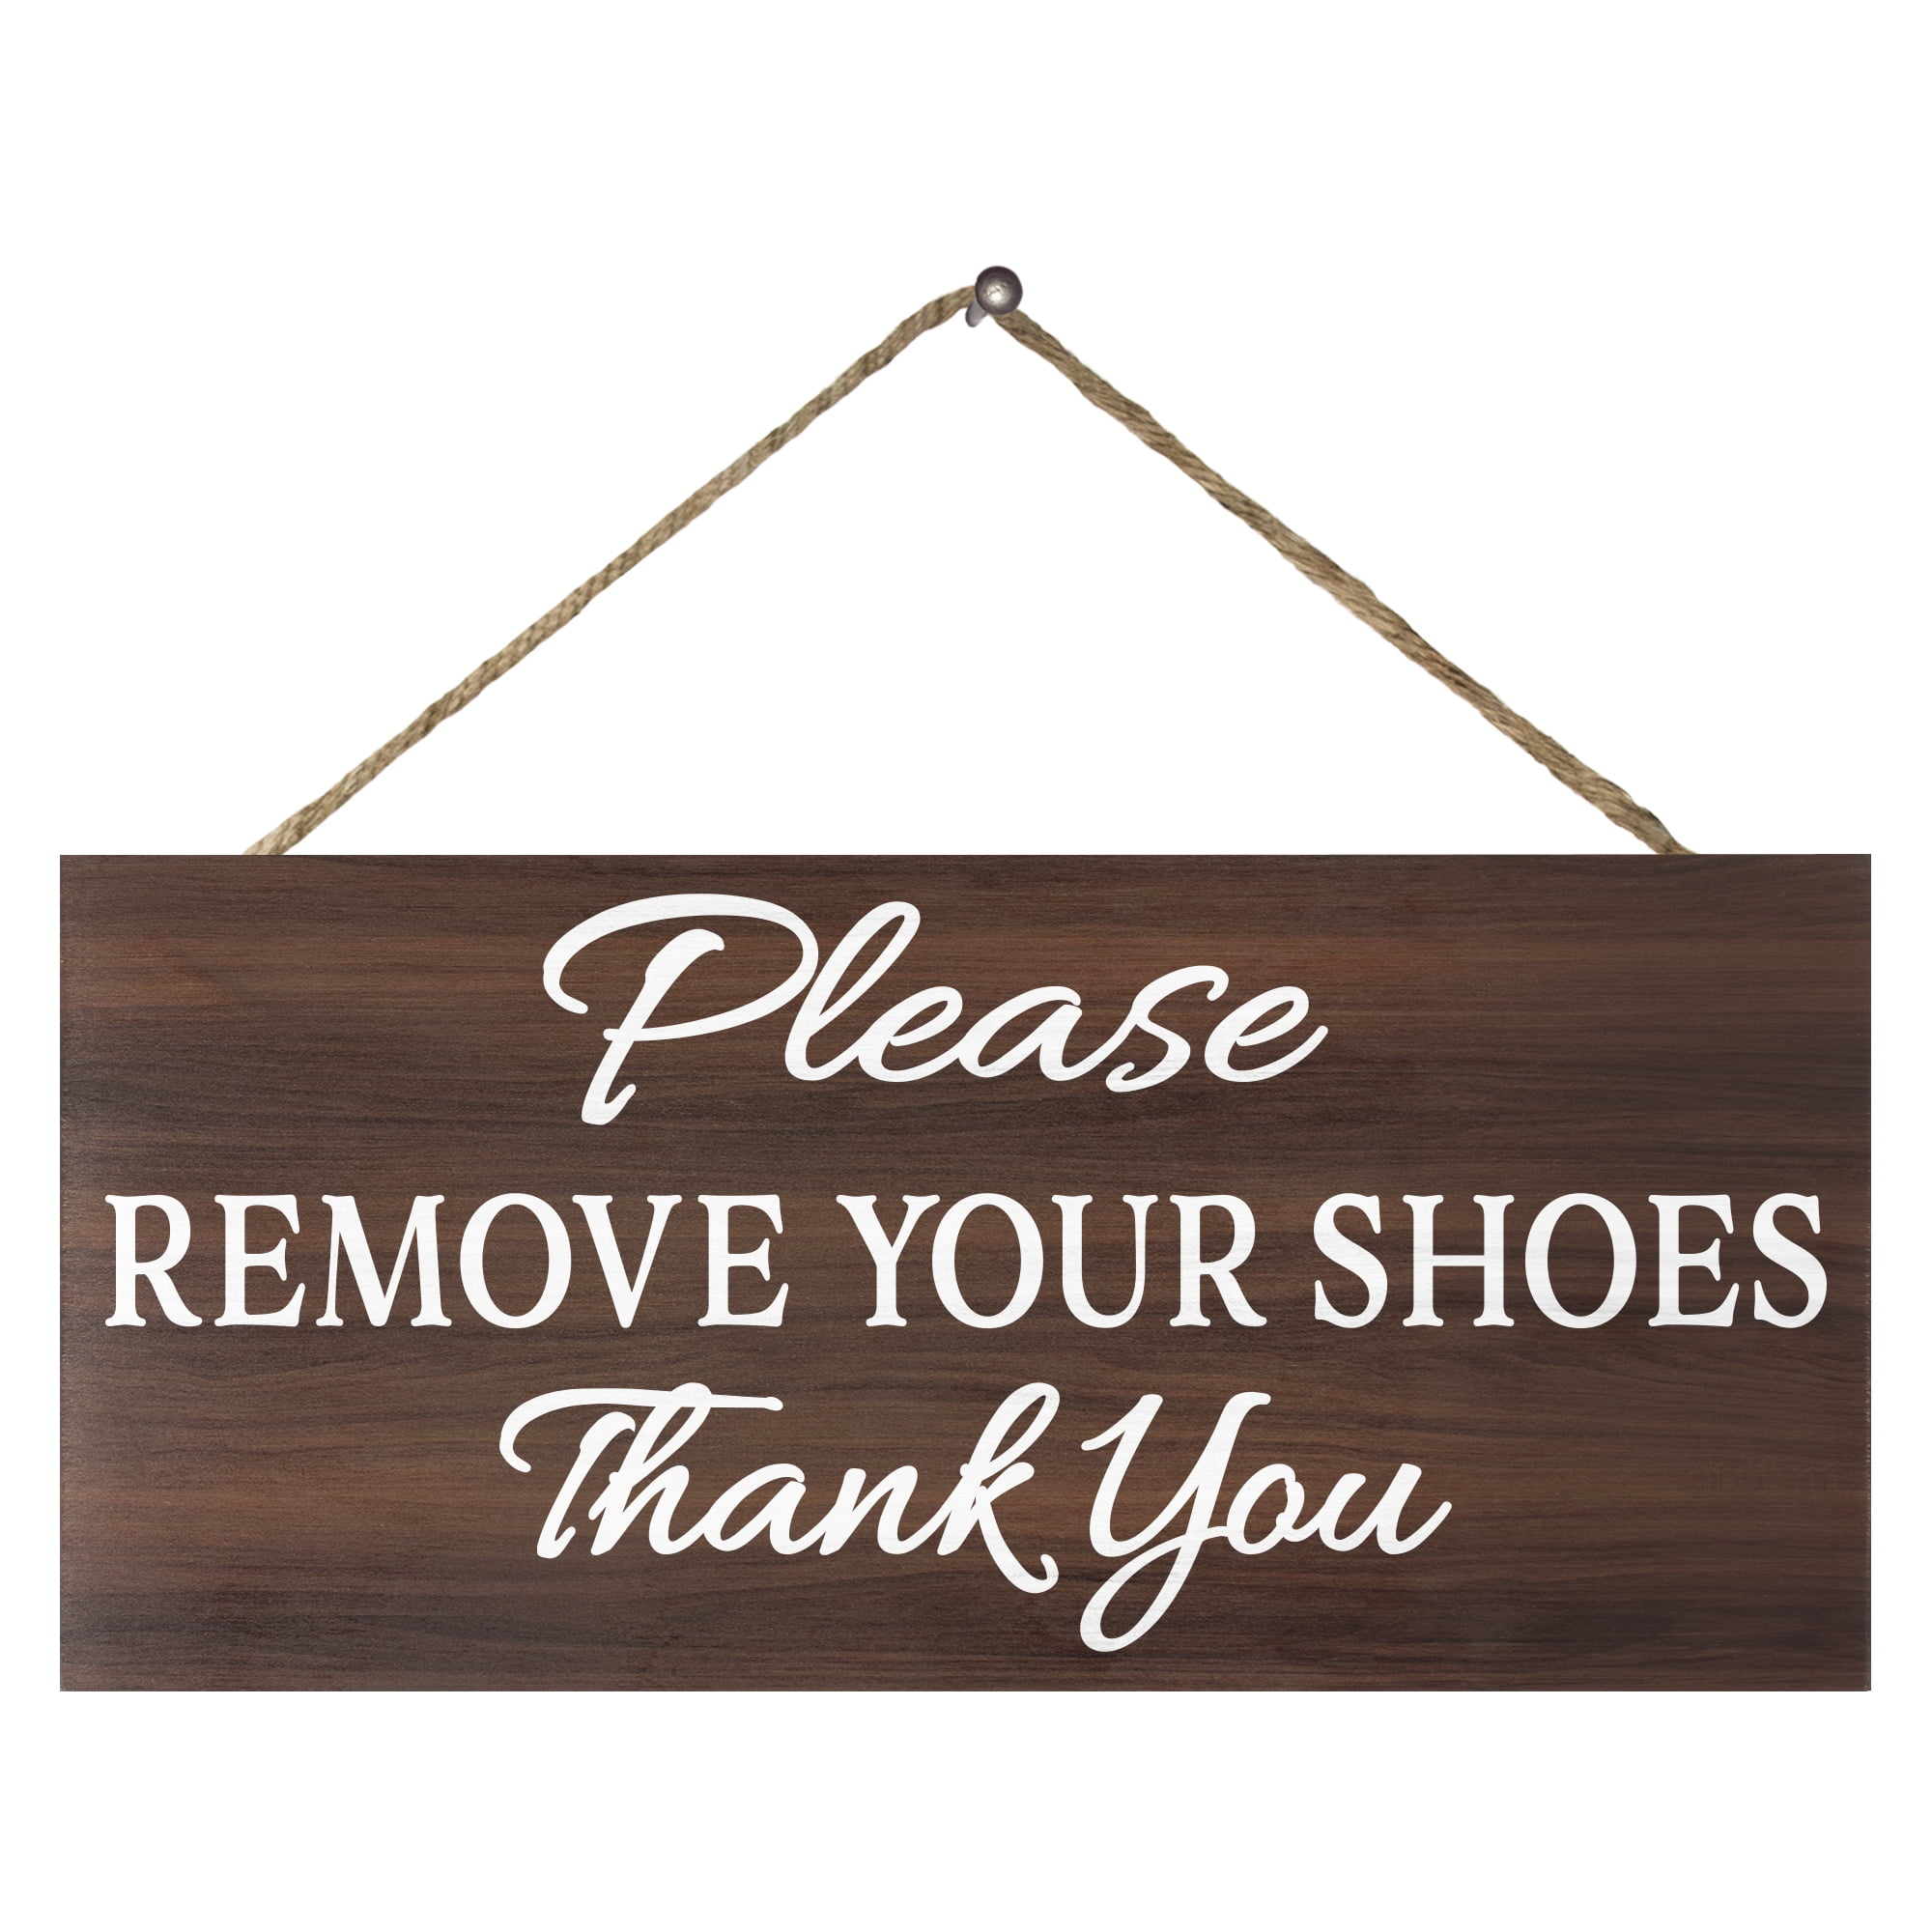 jennygems-remove-your-shoes-sign-please-remove-your-shoes-wood-sign